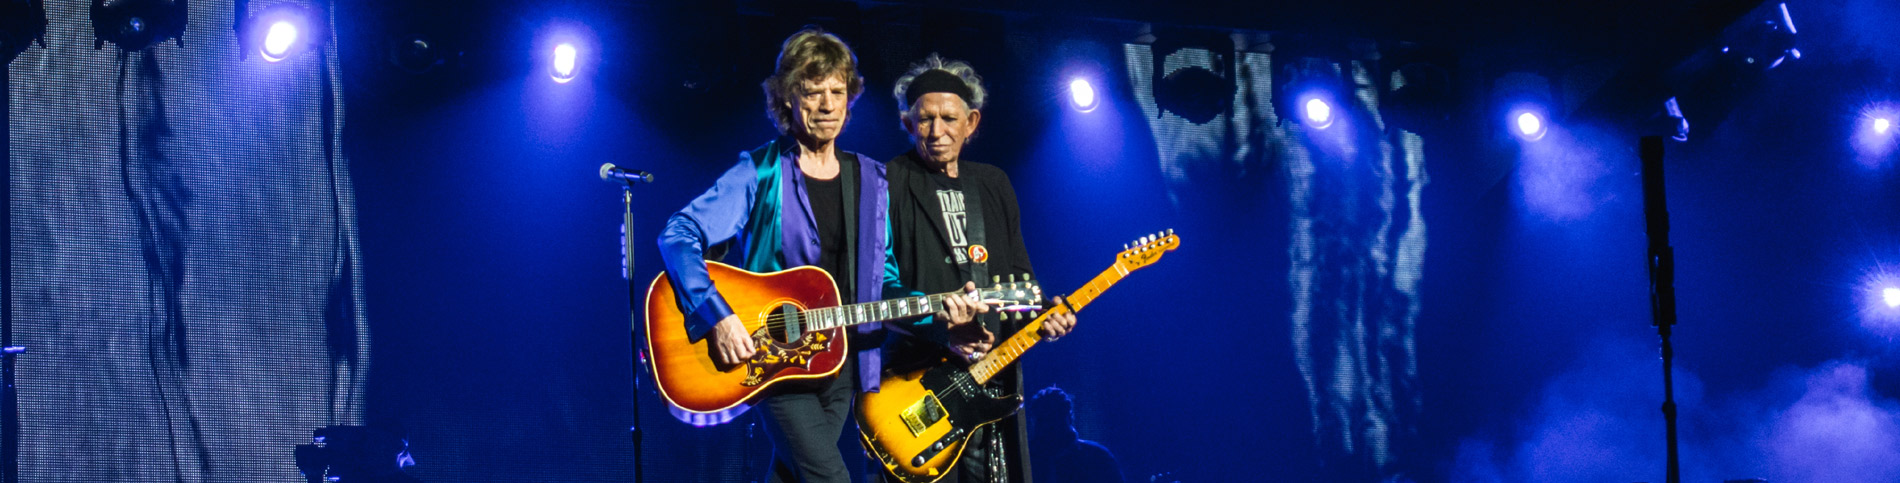 The Rolling Stones Orchard Park NY Tickets